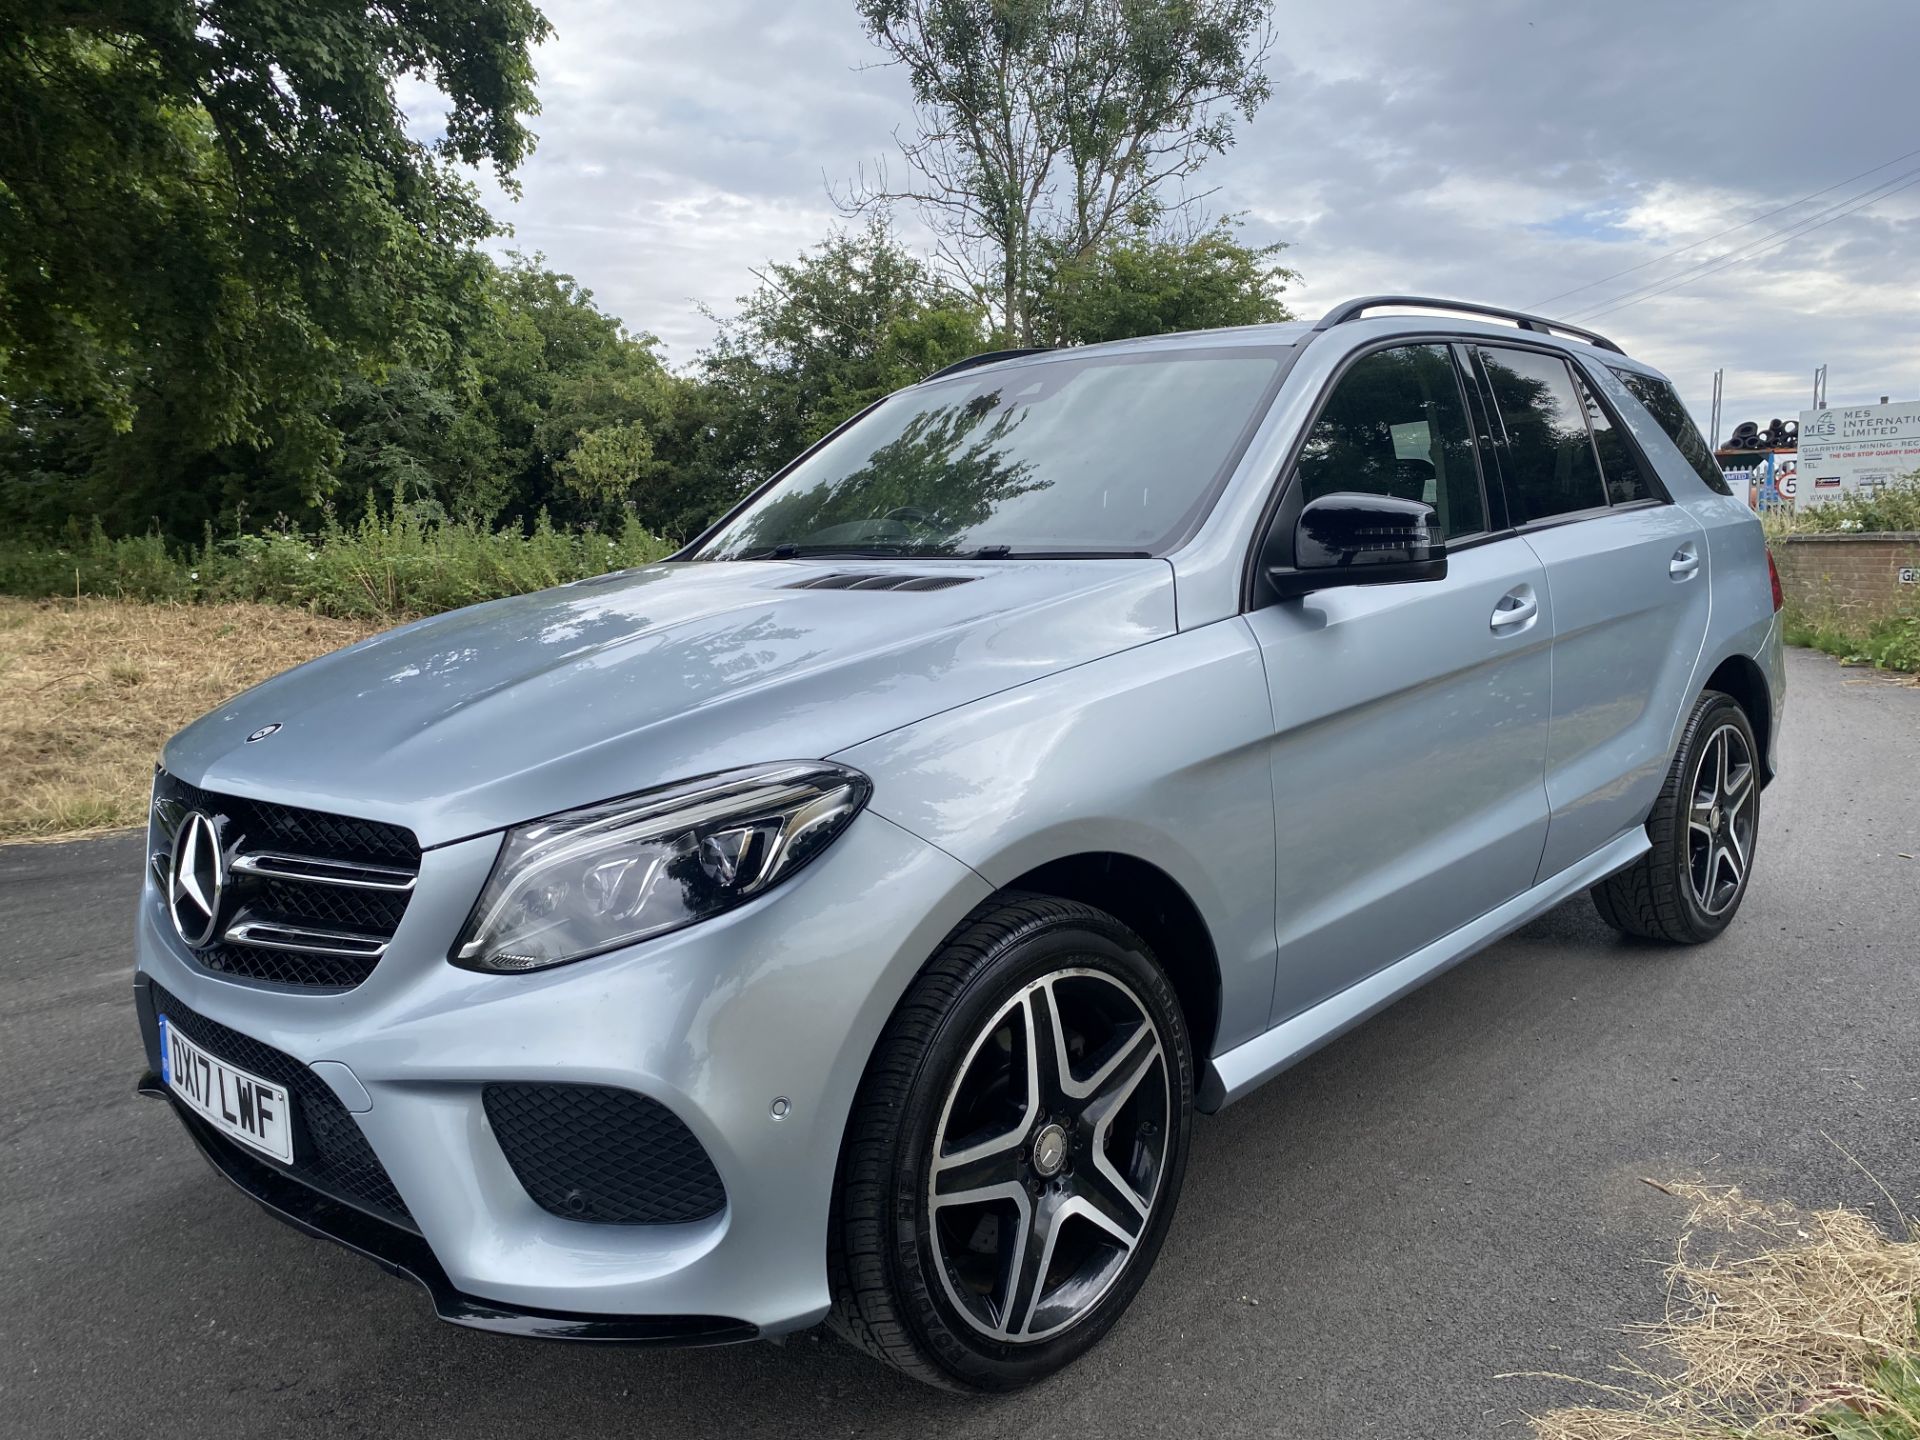 MERCEDES GLE 250d AMG-LINE "NIGHT EDITION" AUTO - 17 REG - 1 OWNER - FULL LEATHER - COMAND - NO VAT! - Image 5 of 36